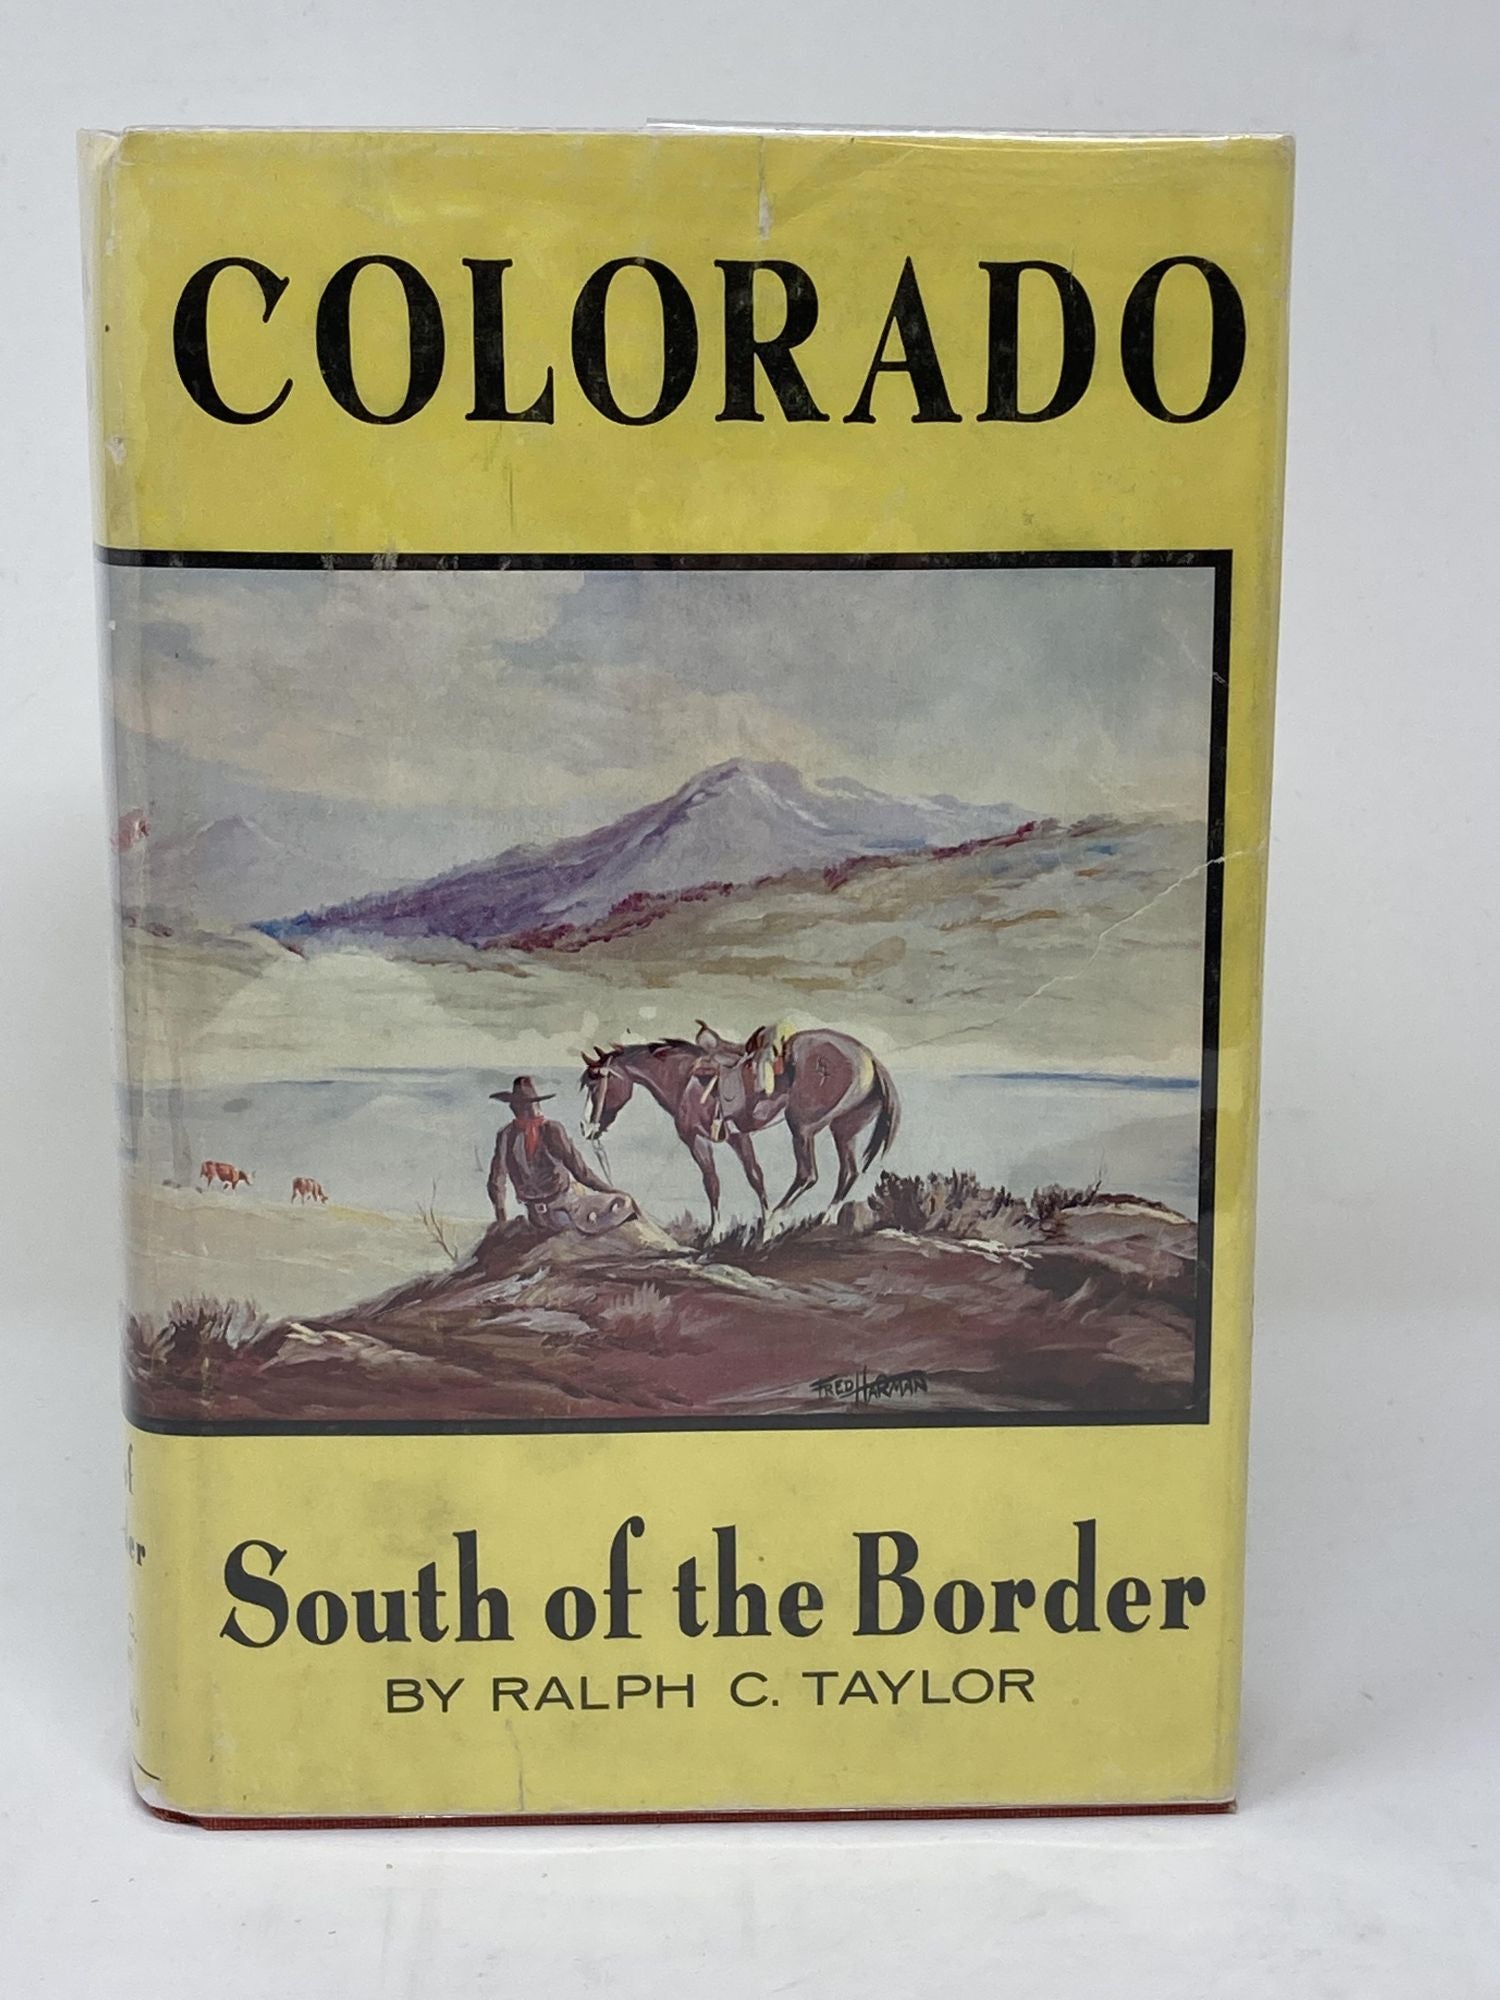 Taylor, Ralph C. - Colorado, South of the Border (Signed)